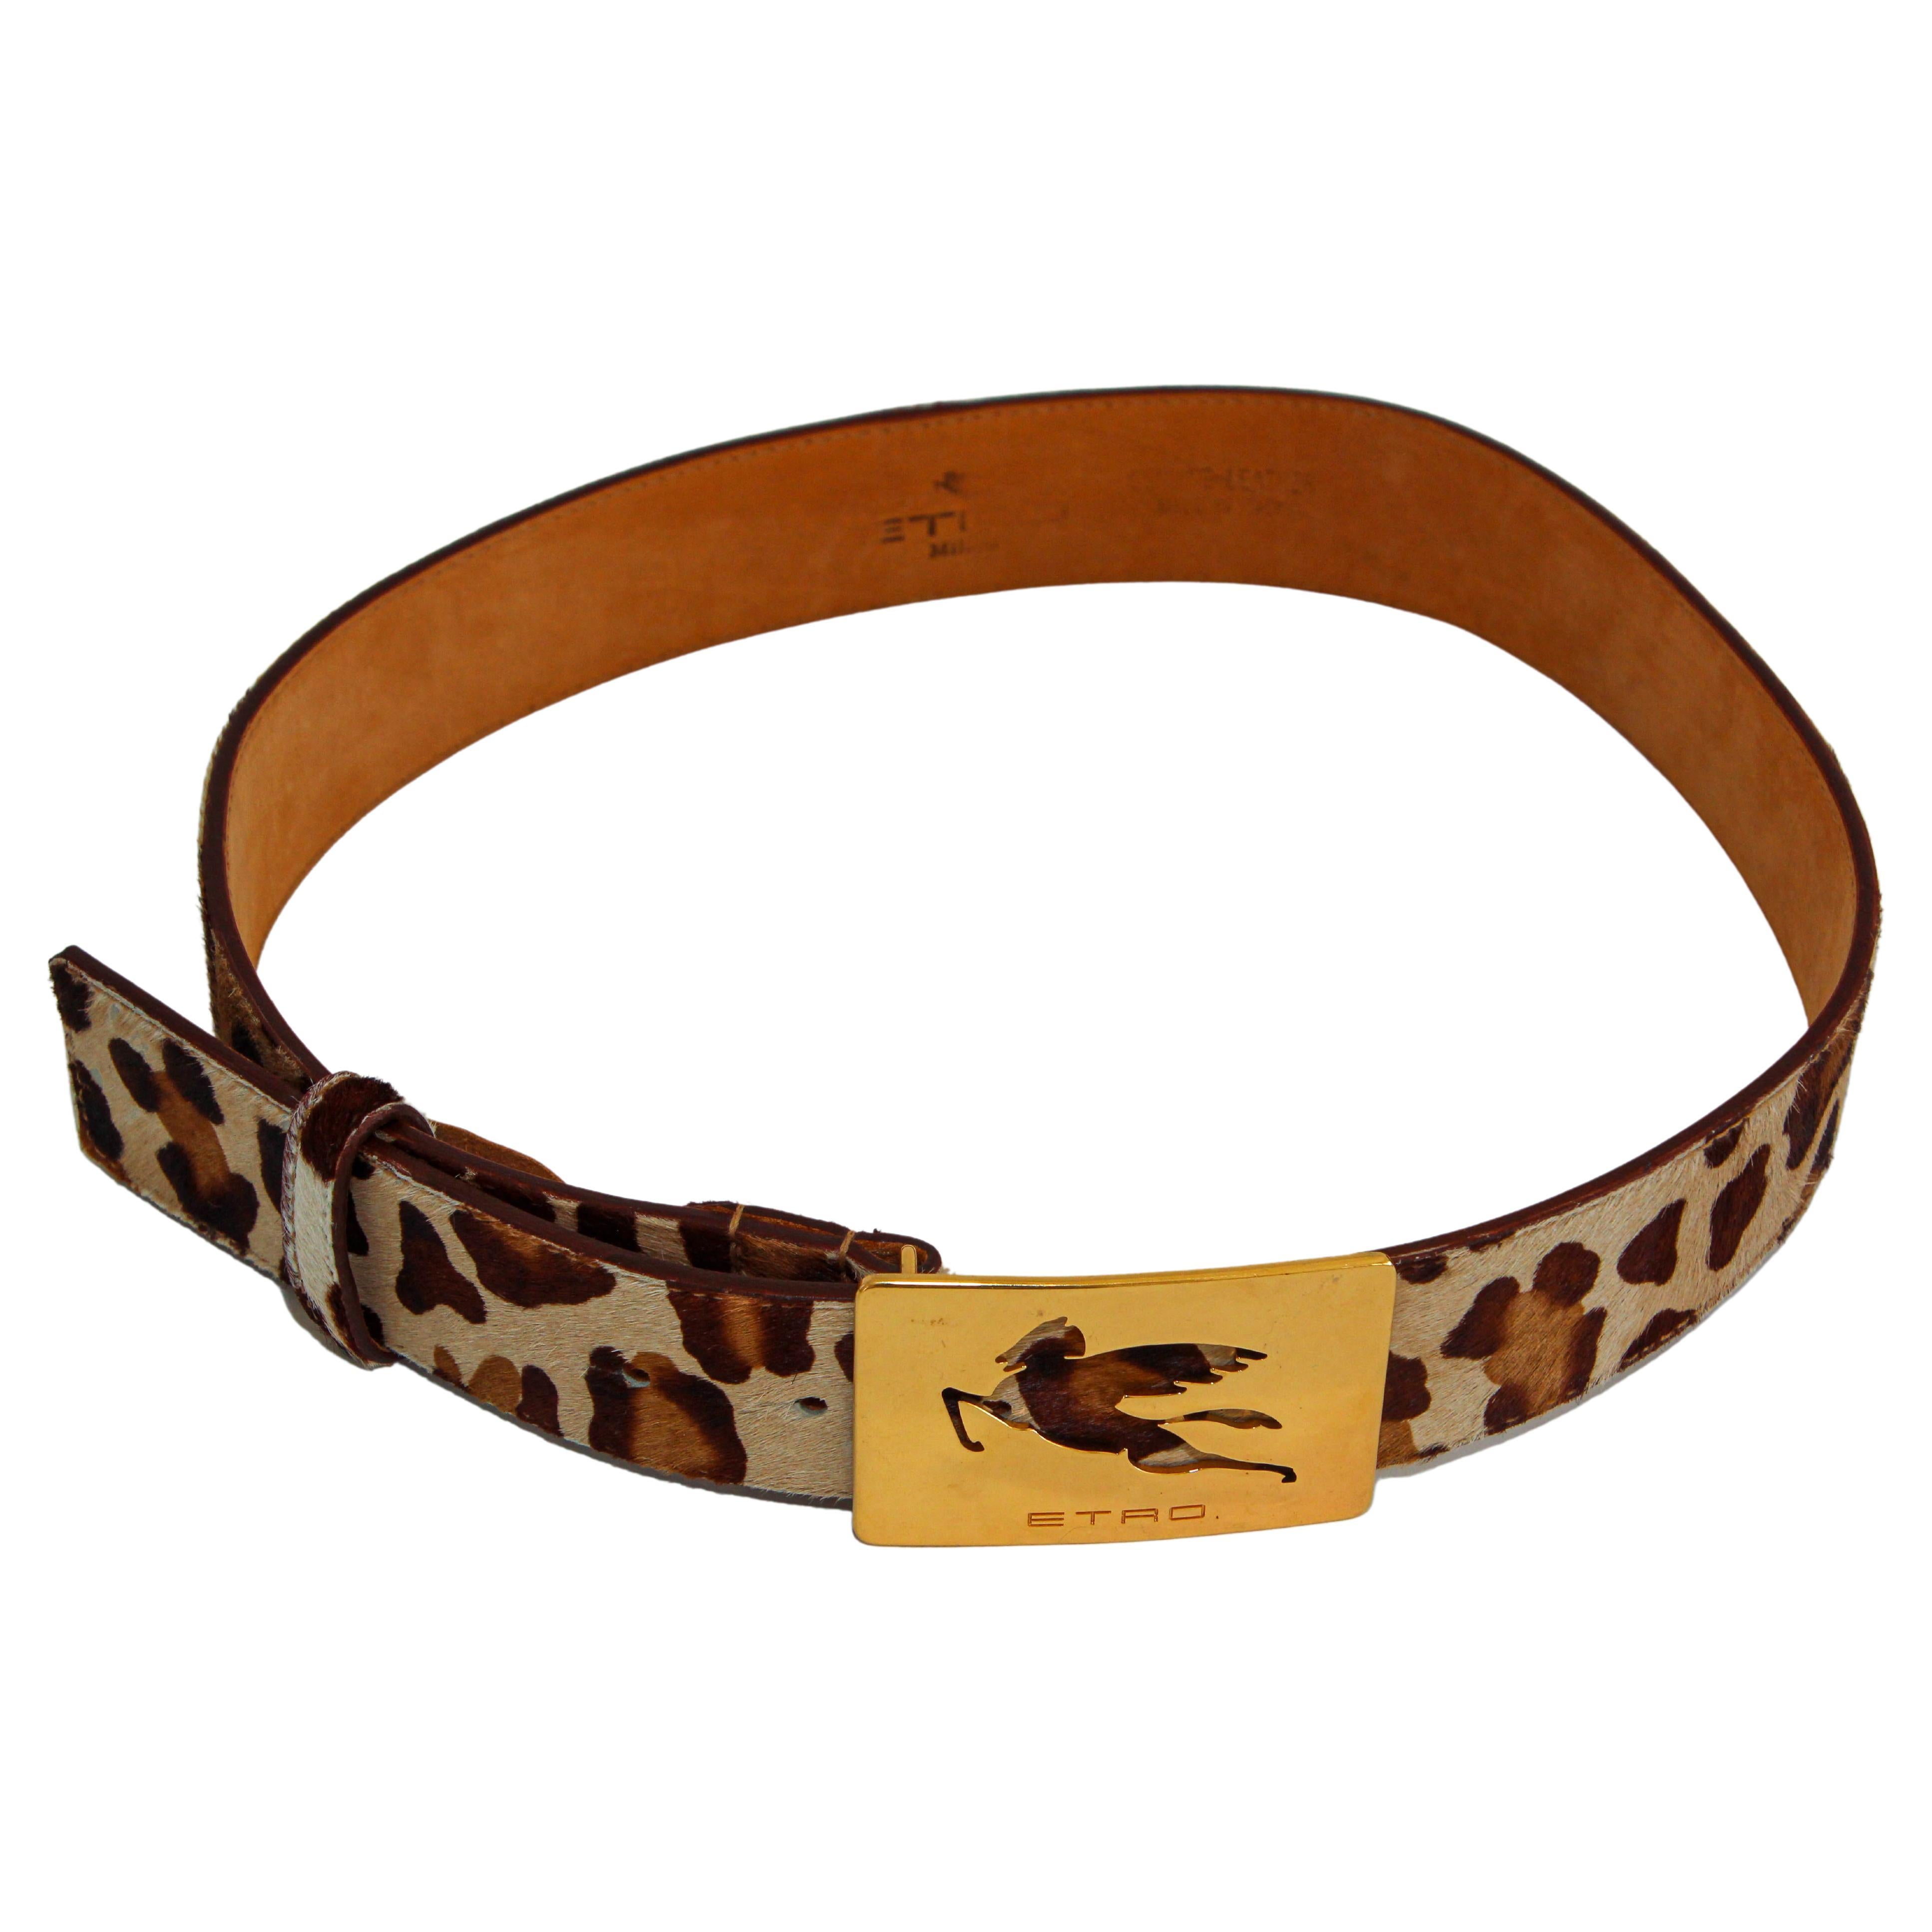 ETRO Leopard-Print Leather Belt with the Iconic Pegaso Brass Buckle